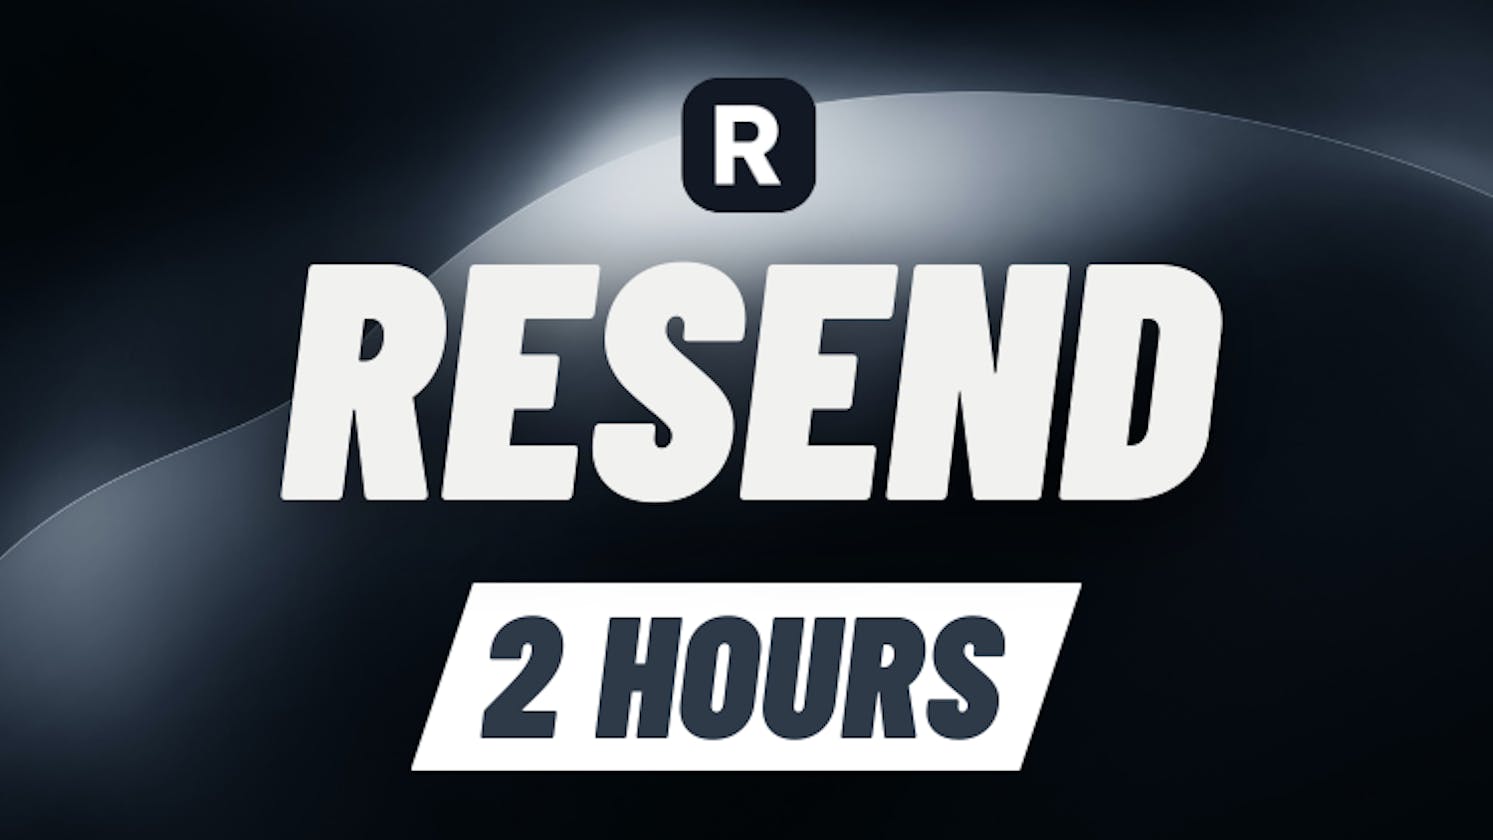 Learn Resend in 2 hours - full course 4K 2023